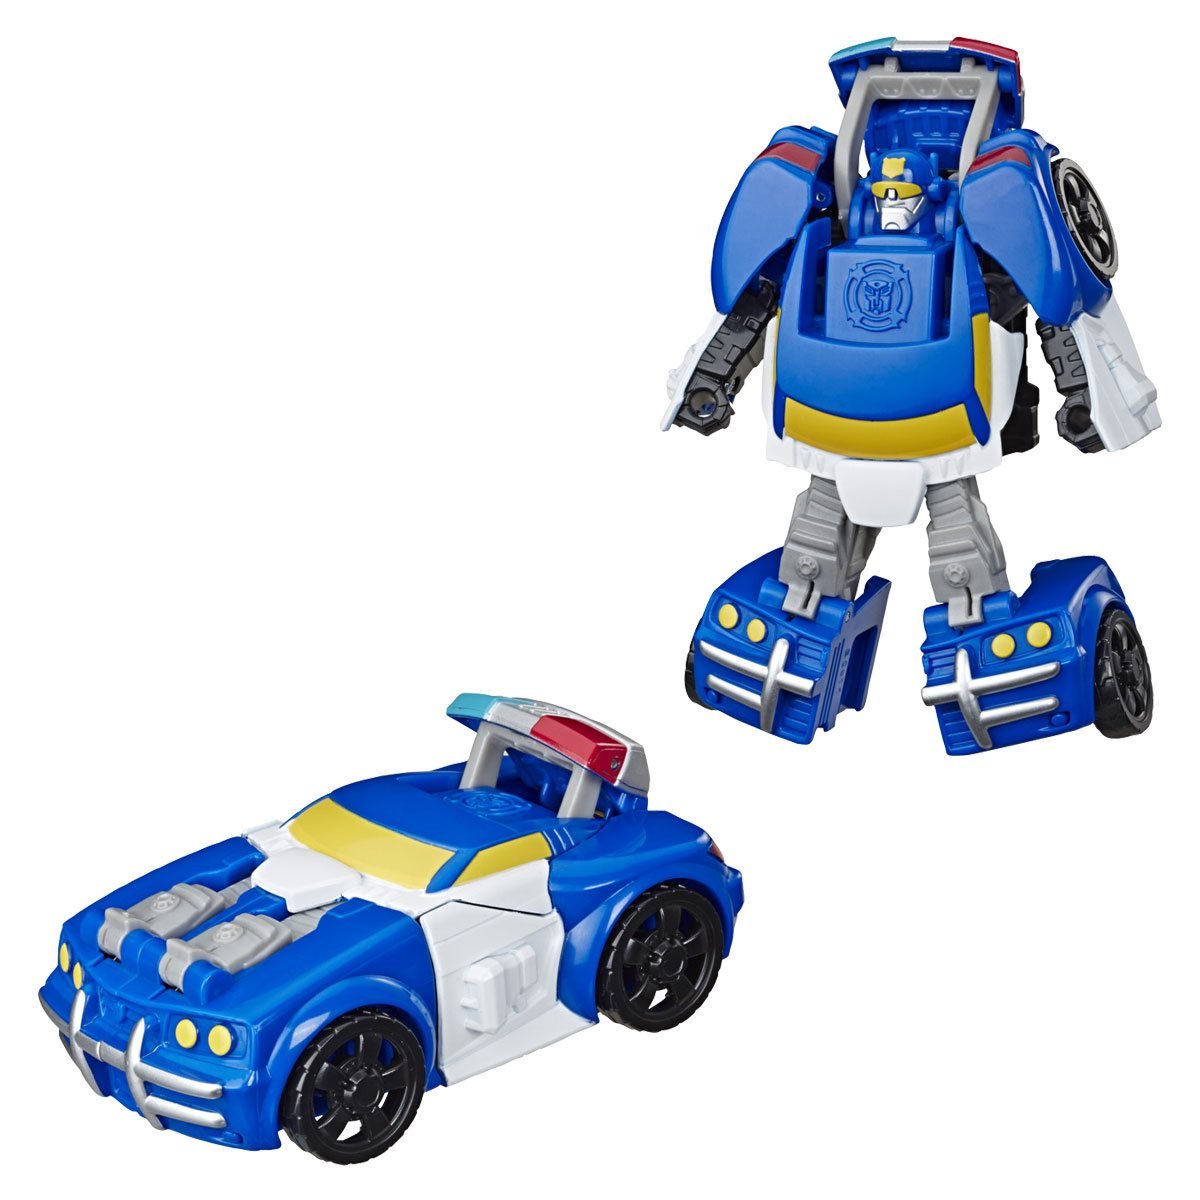 transformers rescue bots chase